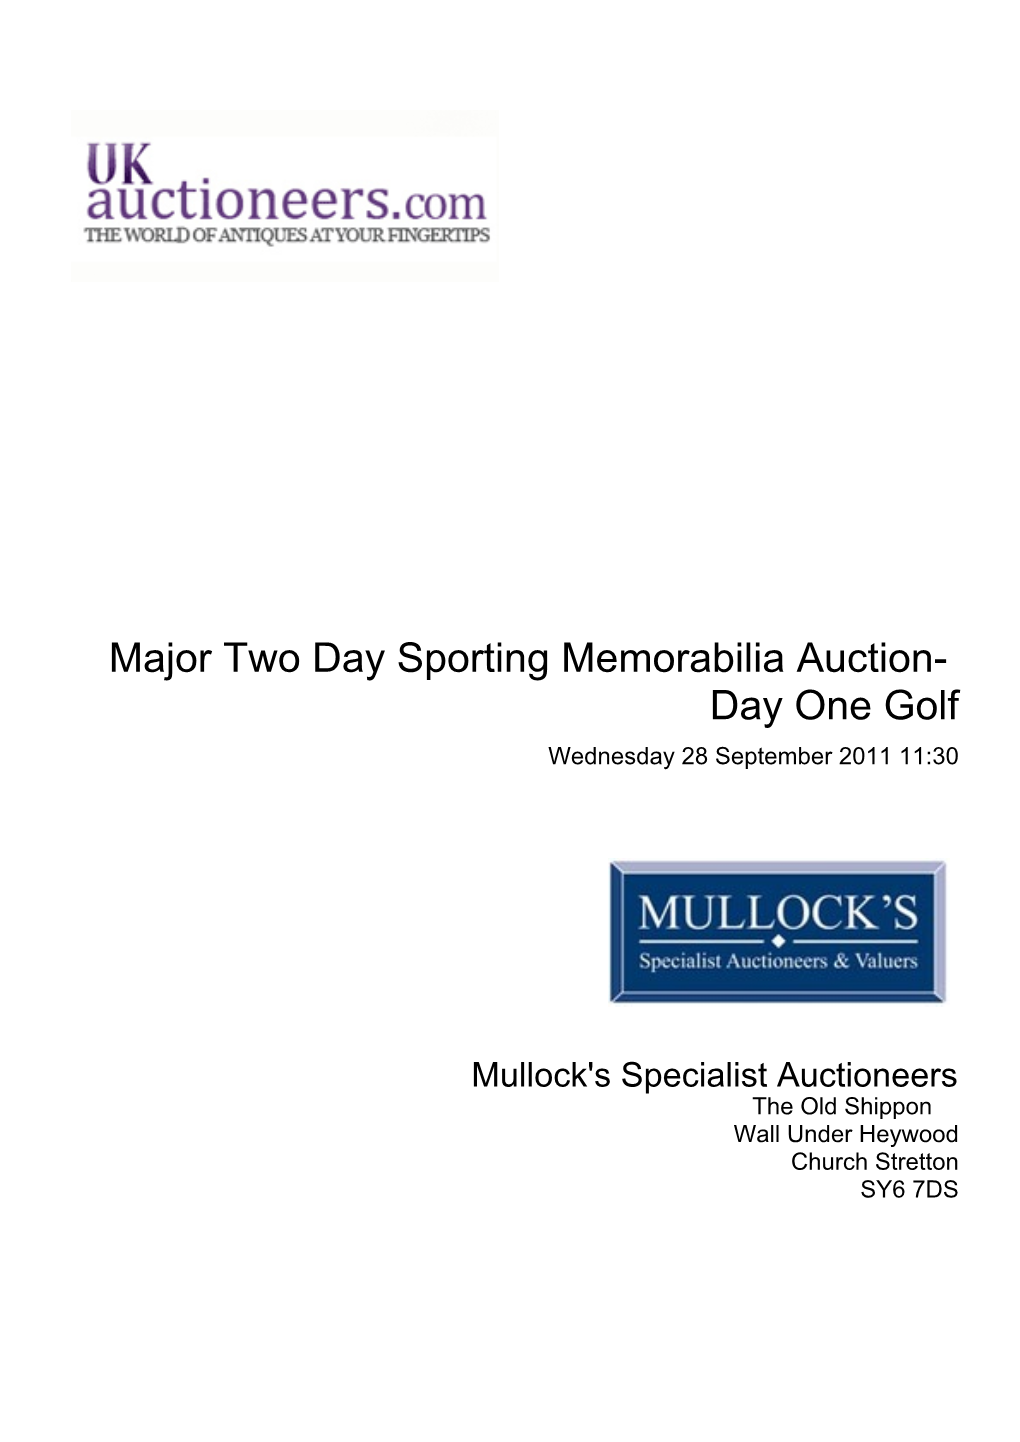 Major Two Day Sporting Memorabilia Auction- Day One Golf Wednesday 28 September 2011 11:30